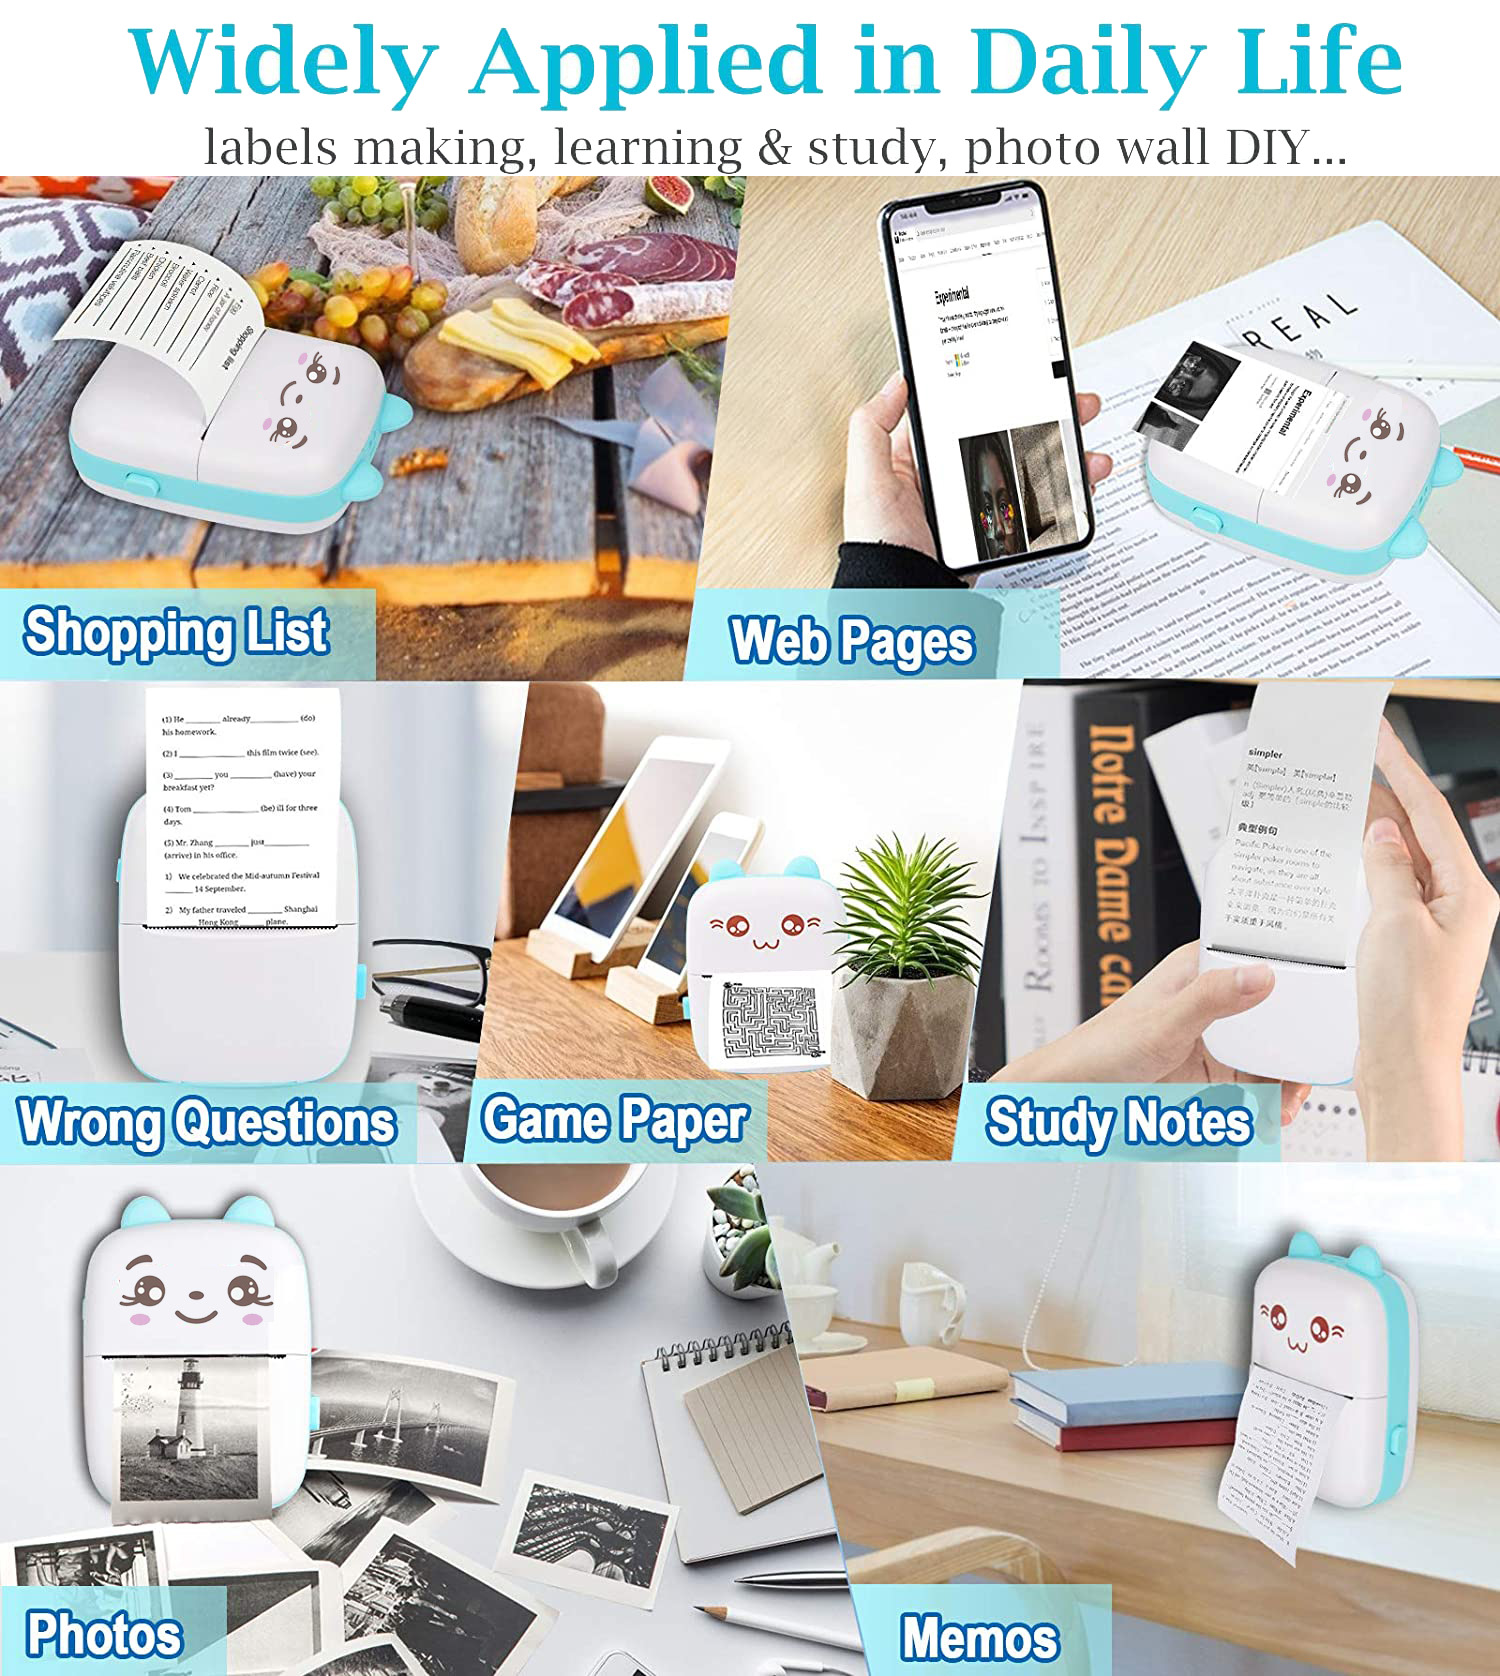 Thermal-Printers-Mini-Printer-Portable-Thermal-Printer-for-All-Smartphones-Wireless-Bluetooth-Pocket-Printers-6-Rolls-Paper-Inkless-Tiny-Printer-for-Photos-Labels-etc-29